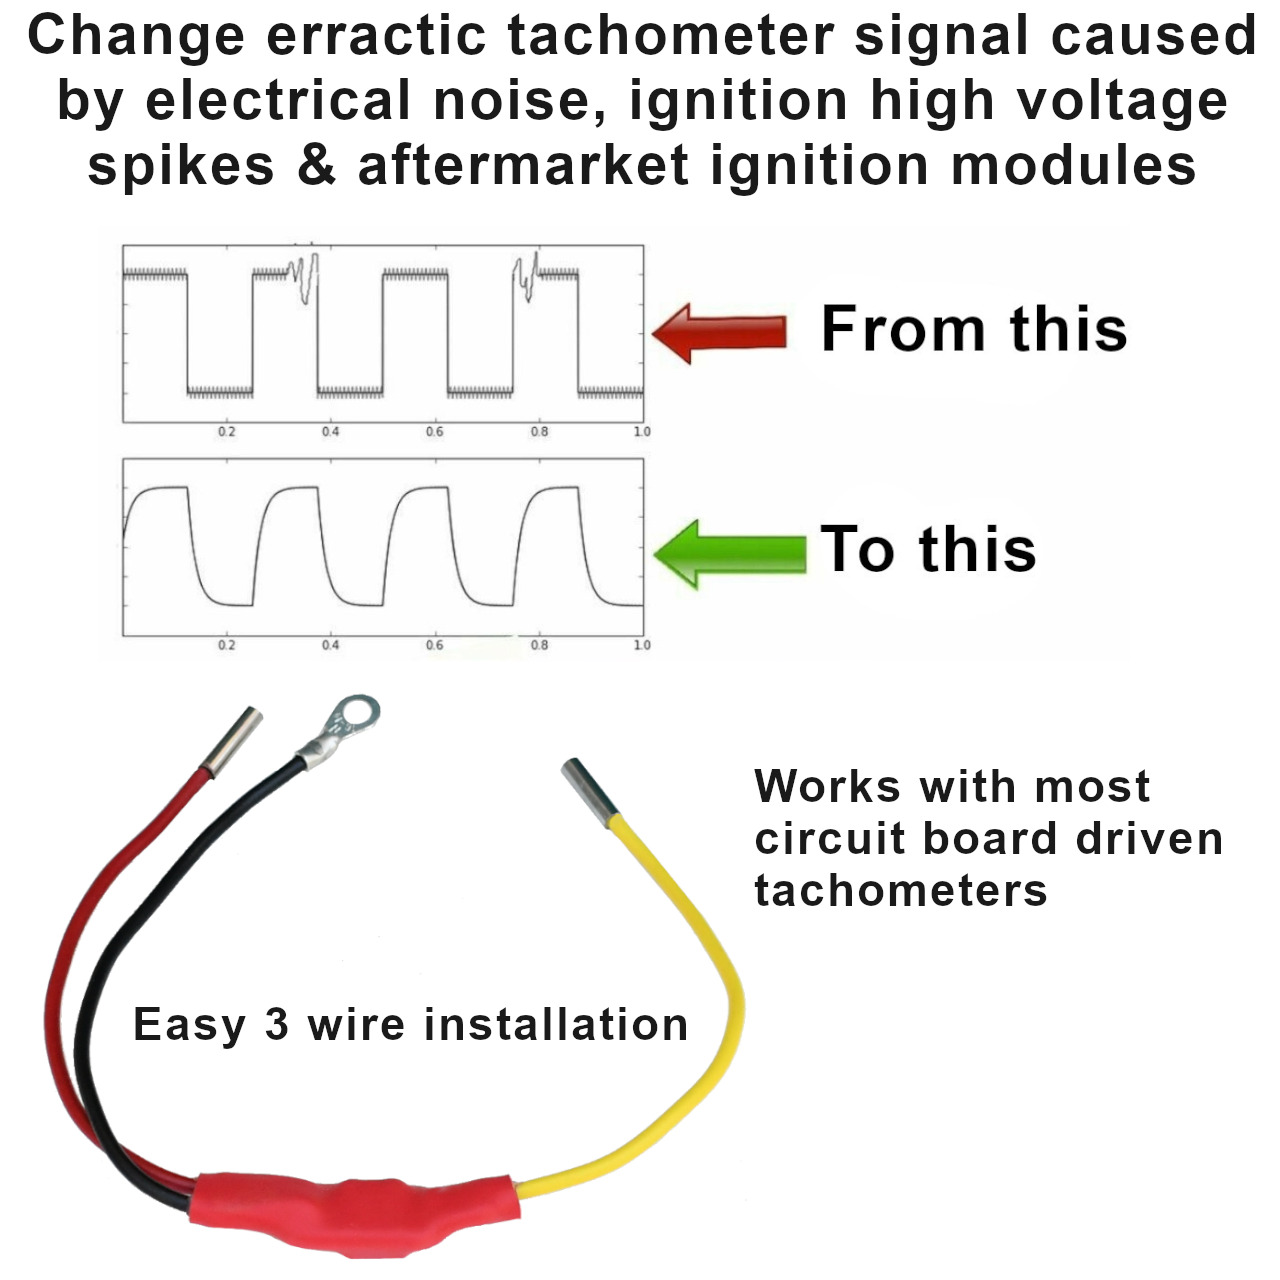 HEI Tachometer signal Filter. Filters out High voltage spikes, electrical noise